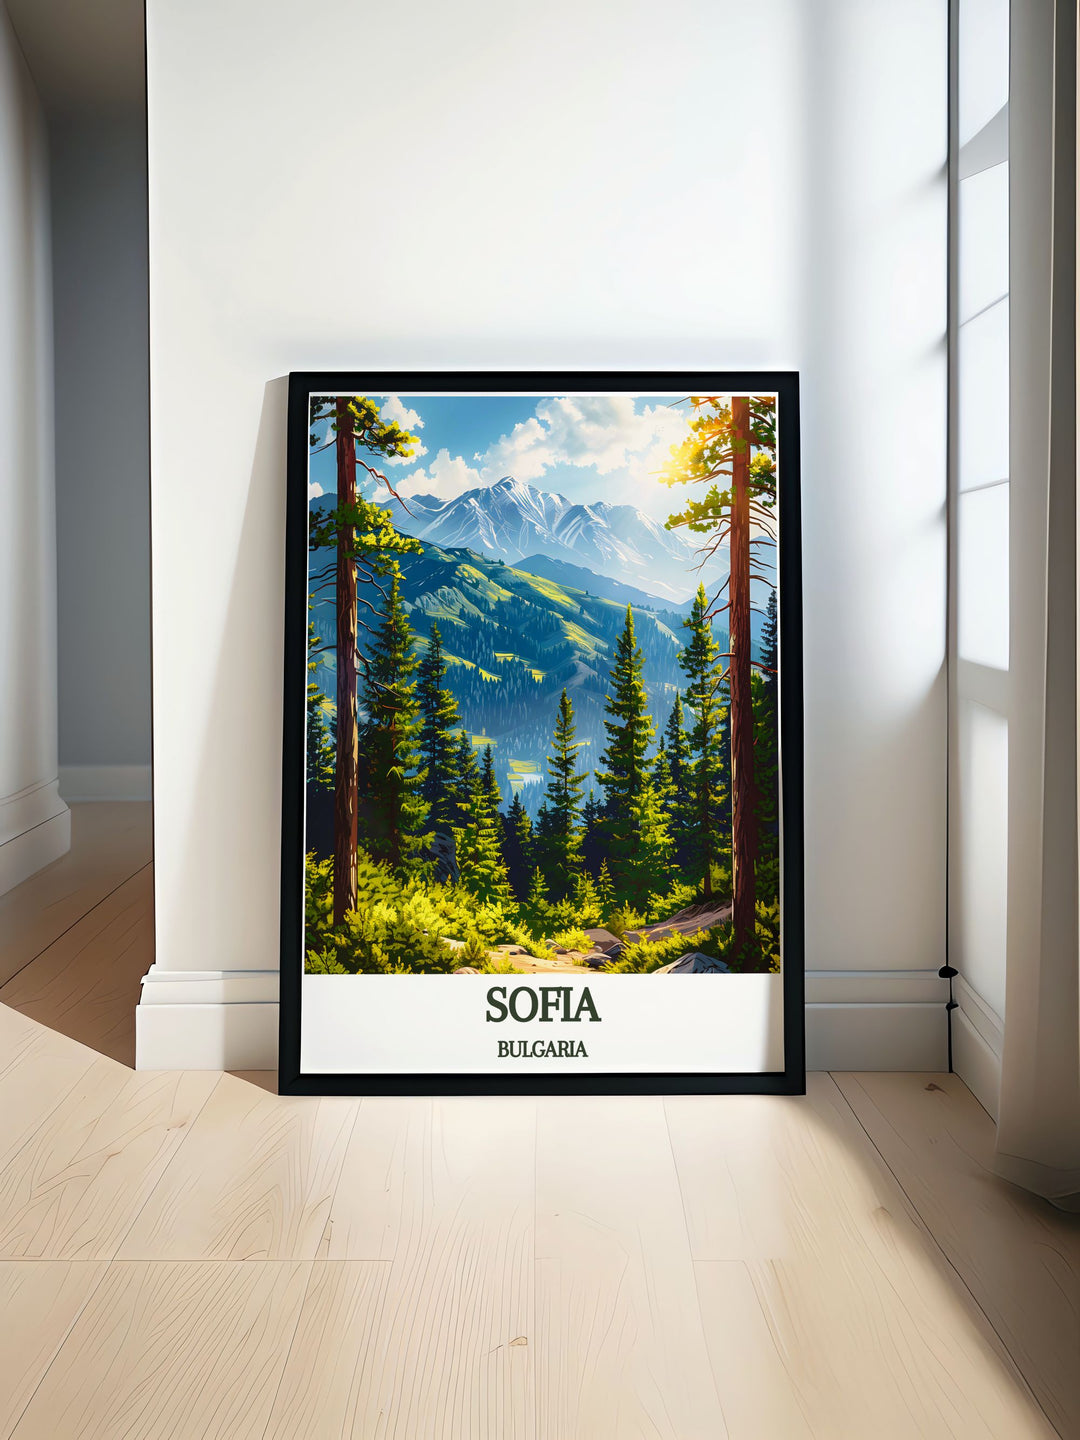 Stunning Sofia Print featuring BULGARIA Vitosha mountain showcasing its lush greenery and snow capped peaks perfect for enhancing your home decor with a touch of Bulgarian natural beauty.